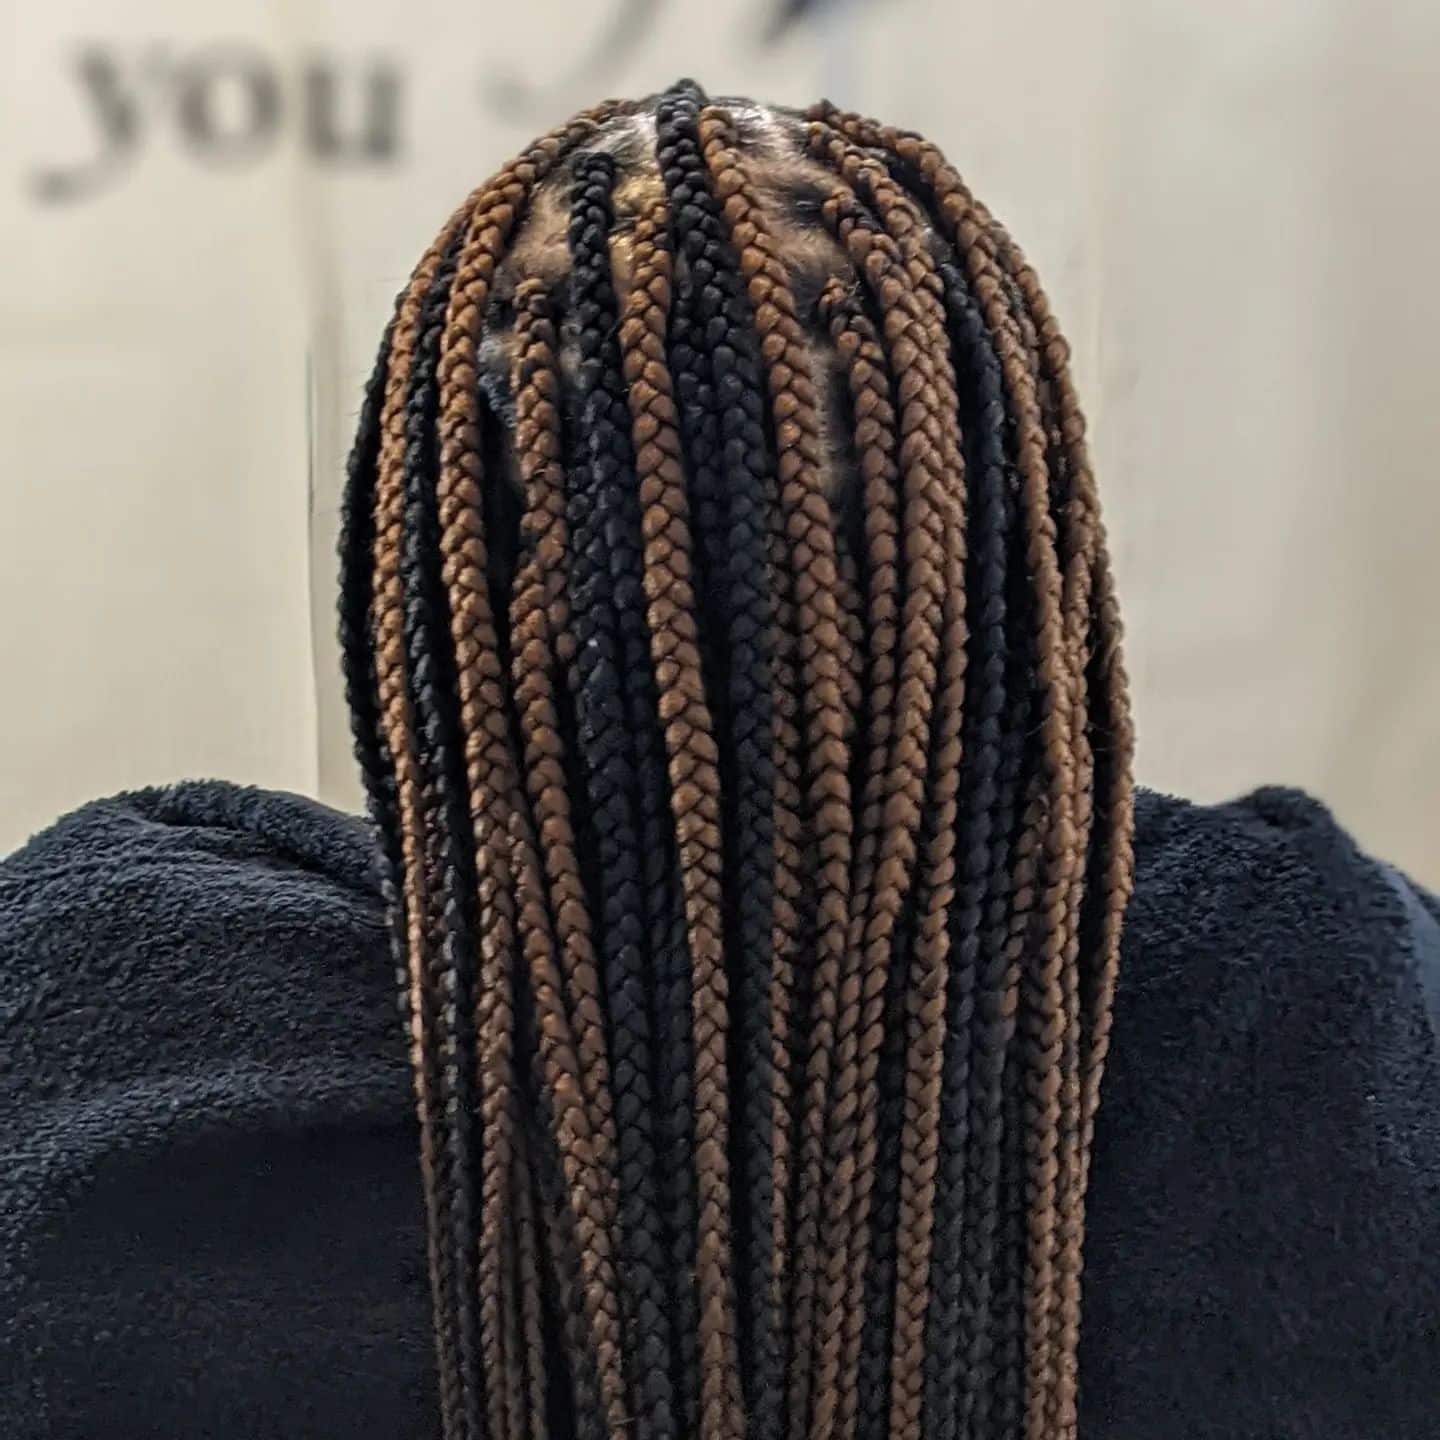 Black and Brown Braids as a style of brown braids